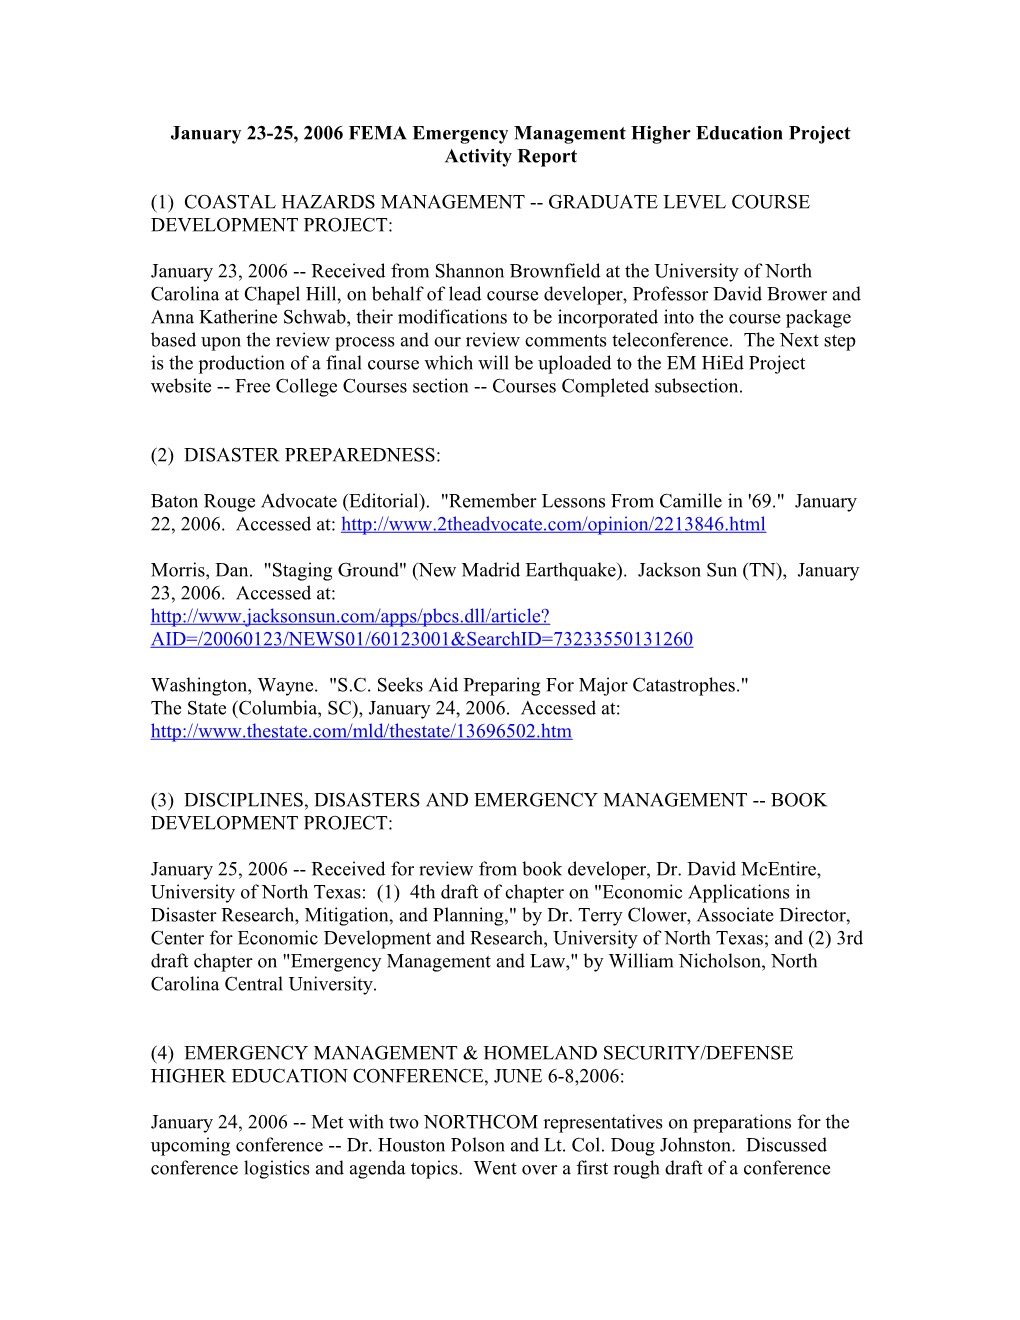 January 23-25, 2006 FEMA Emergency Management Higher Education Project Activity Report